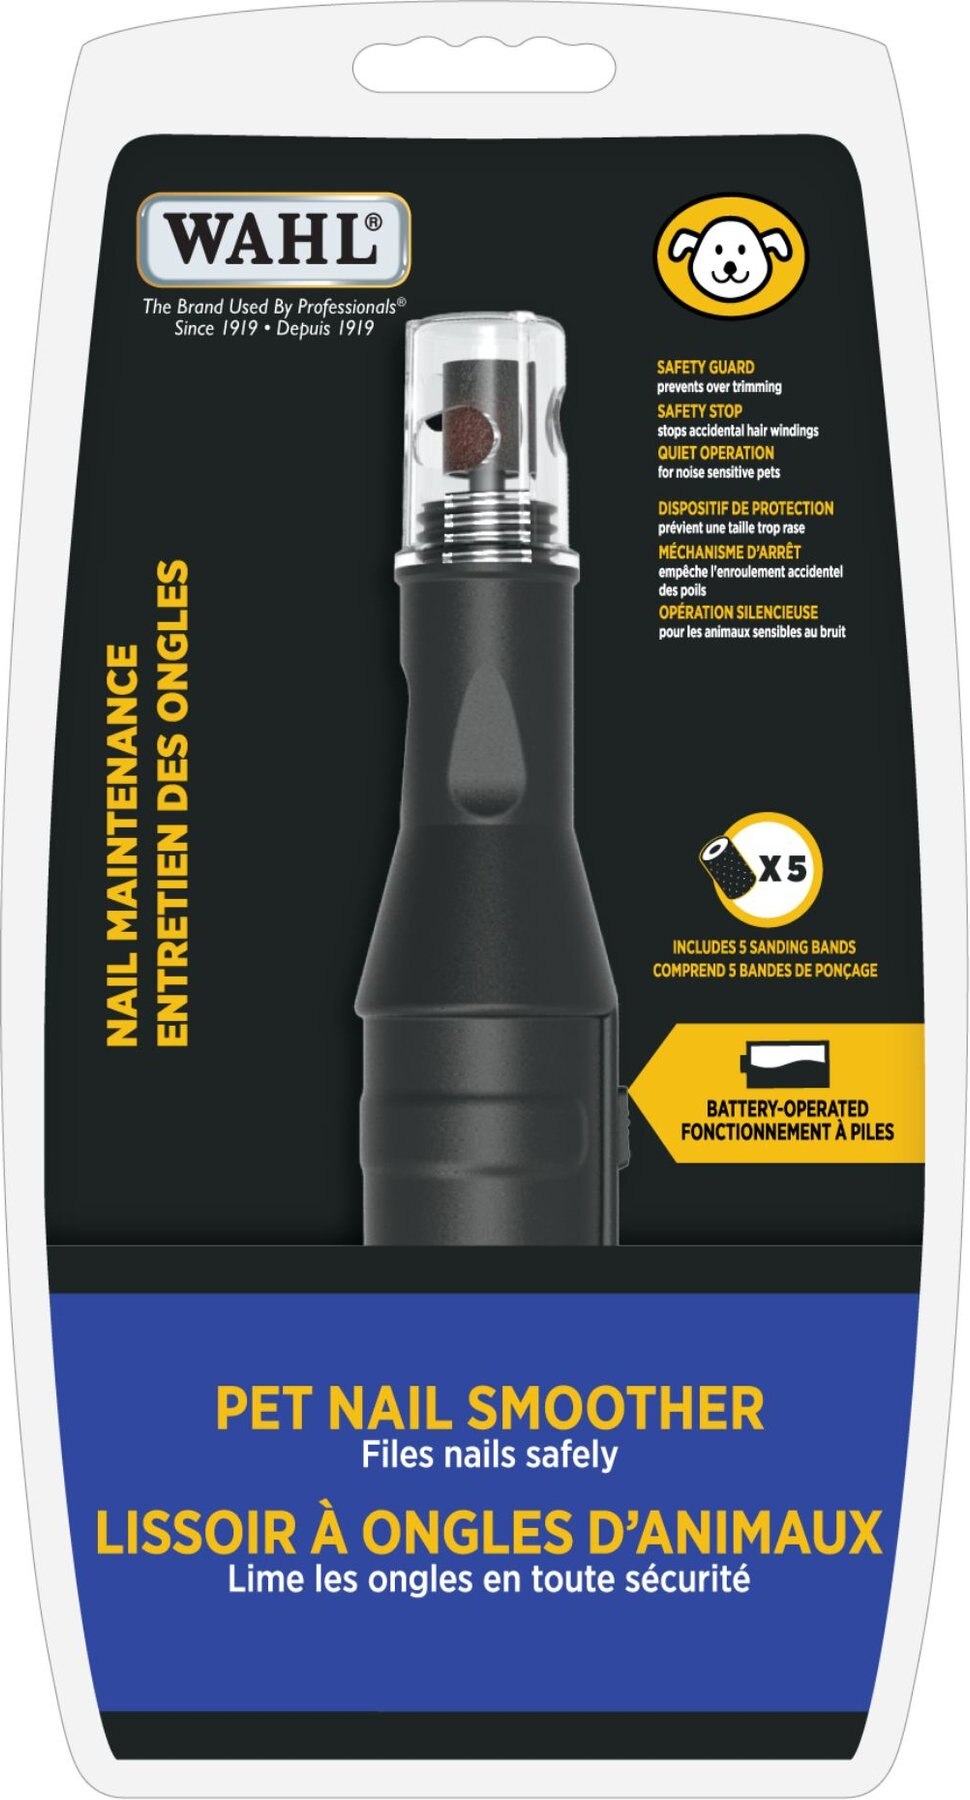 Wahl Dog and Cat Nail Smoother, Battery-operated, easy to use - Walmart.ca